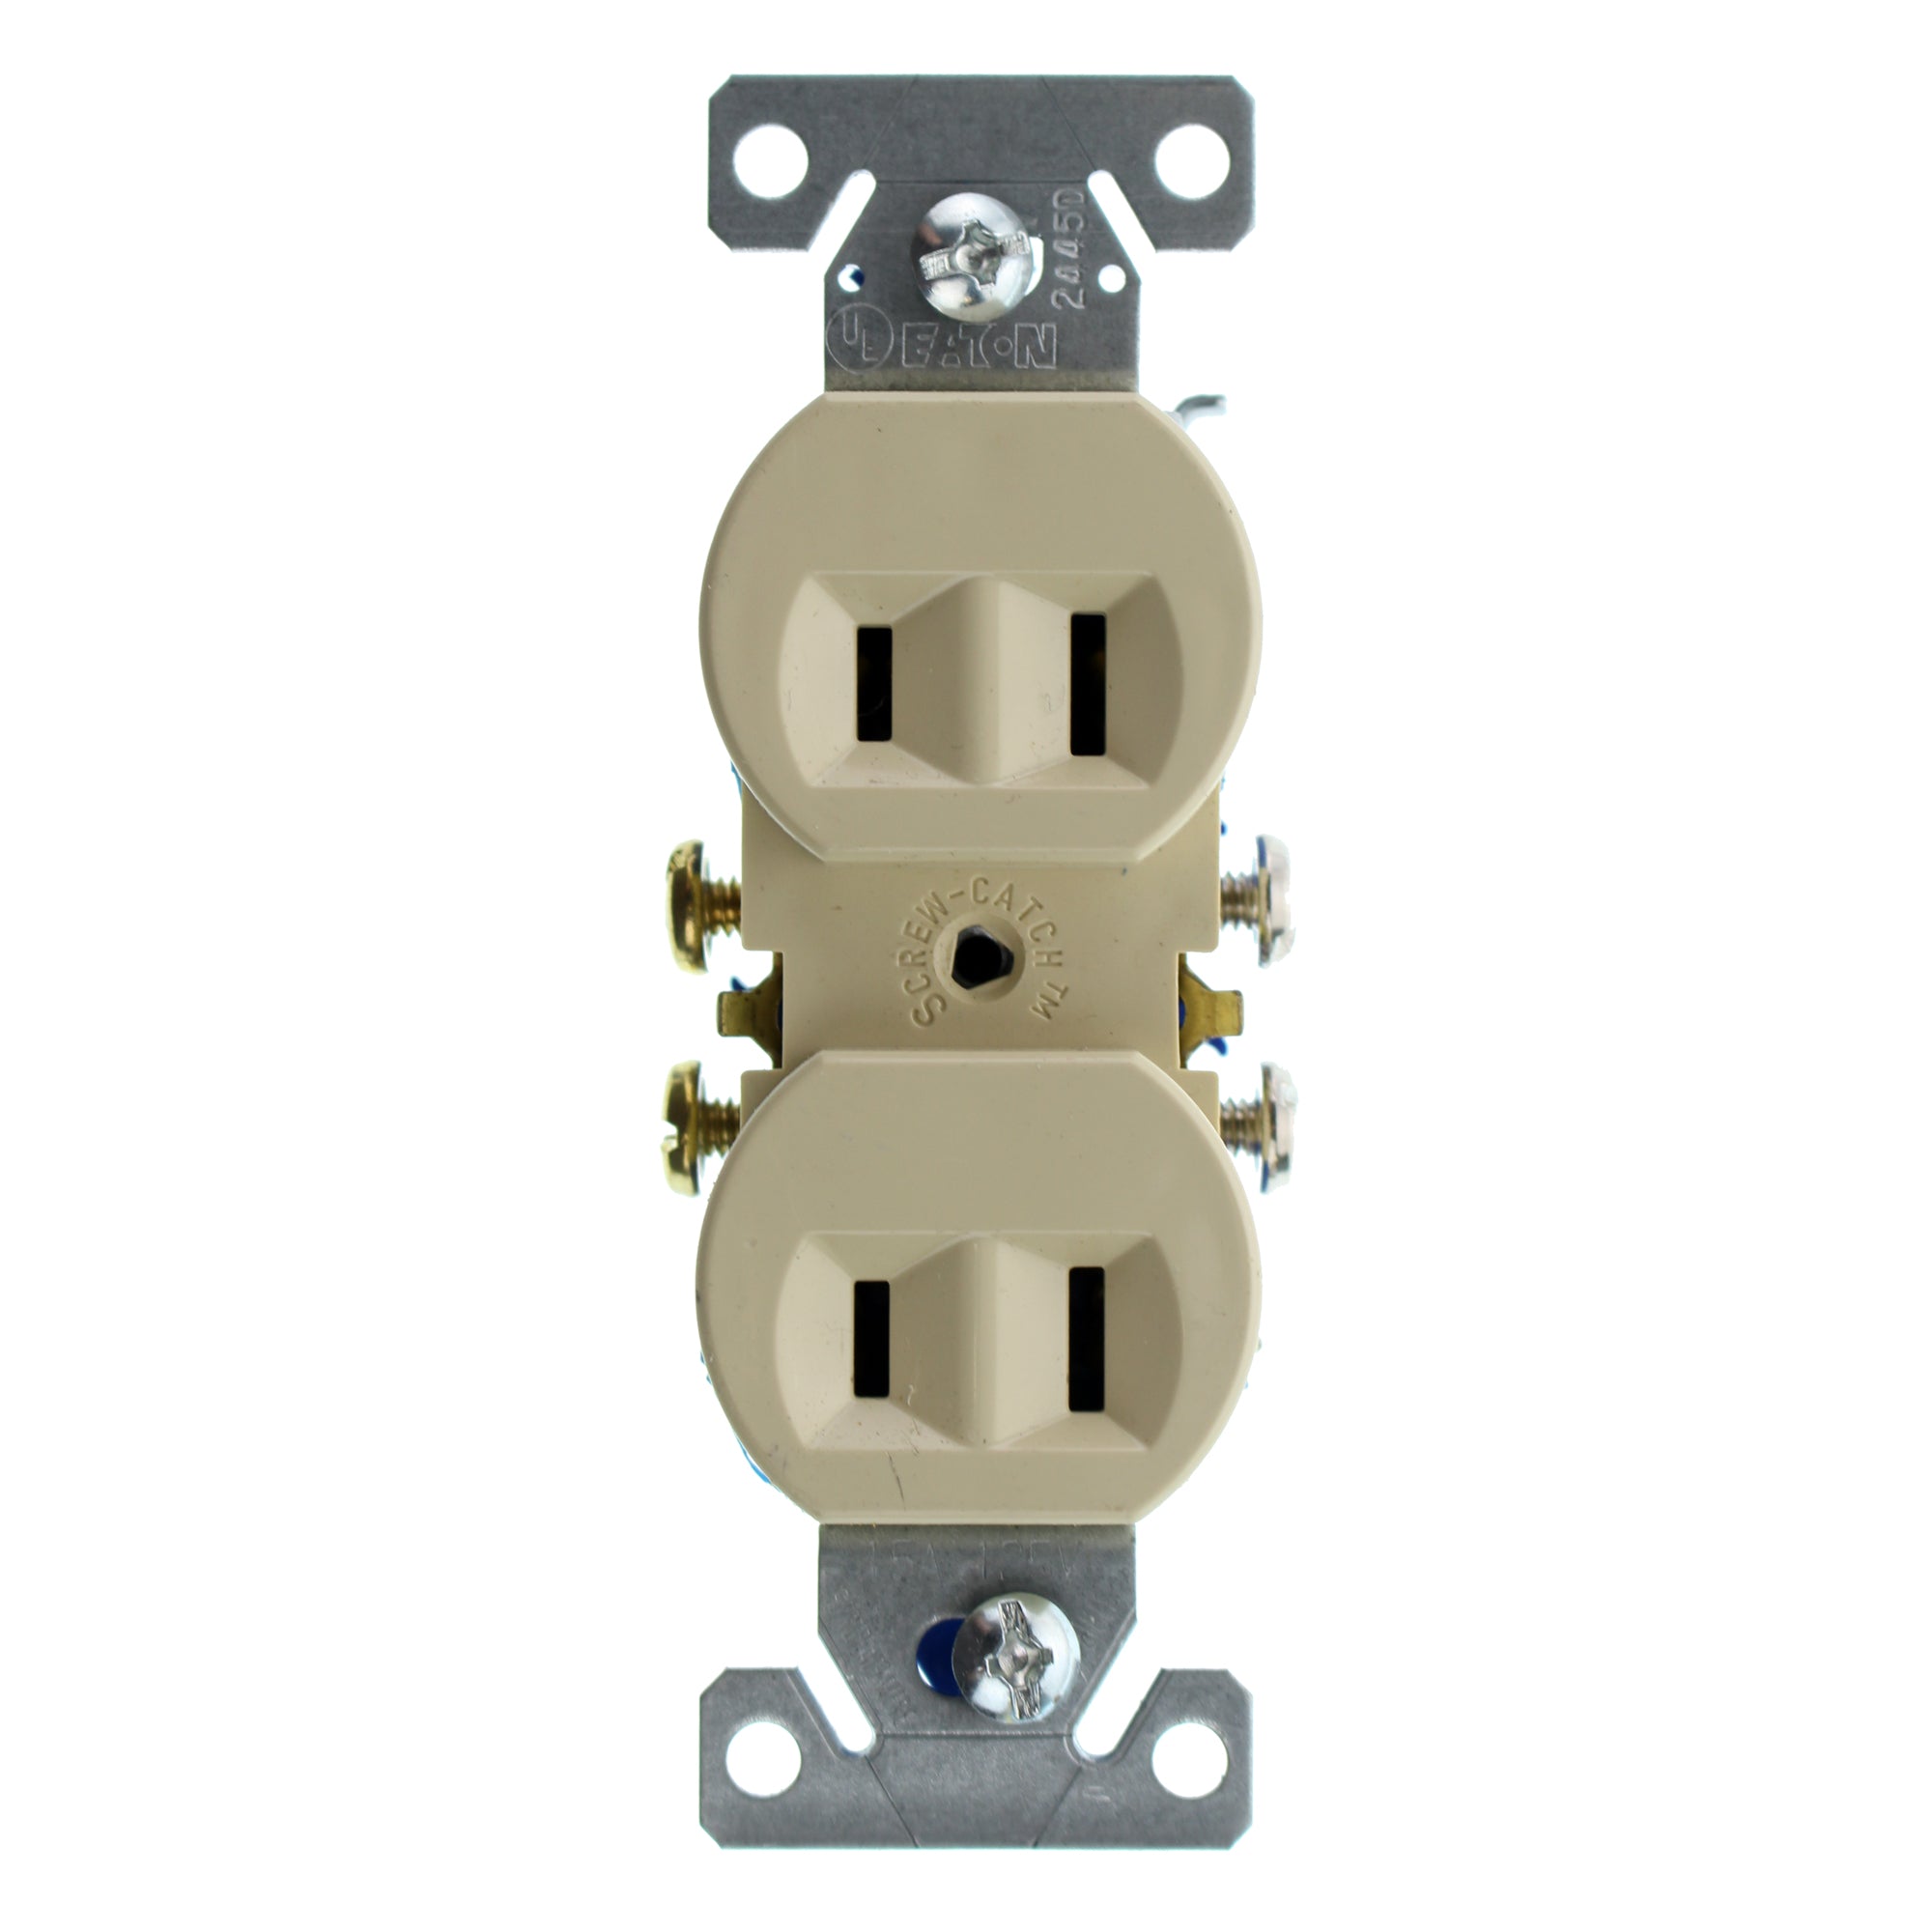 EATON, EATON COOPER 736V-SP-L RECETPACLE OUTLET, NON-GROUNDING, 2-WIRE, 15A 120V, IVORY